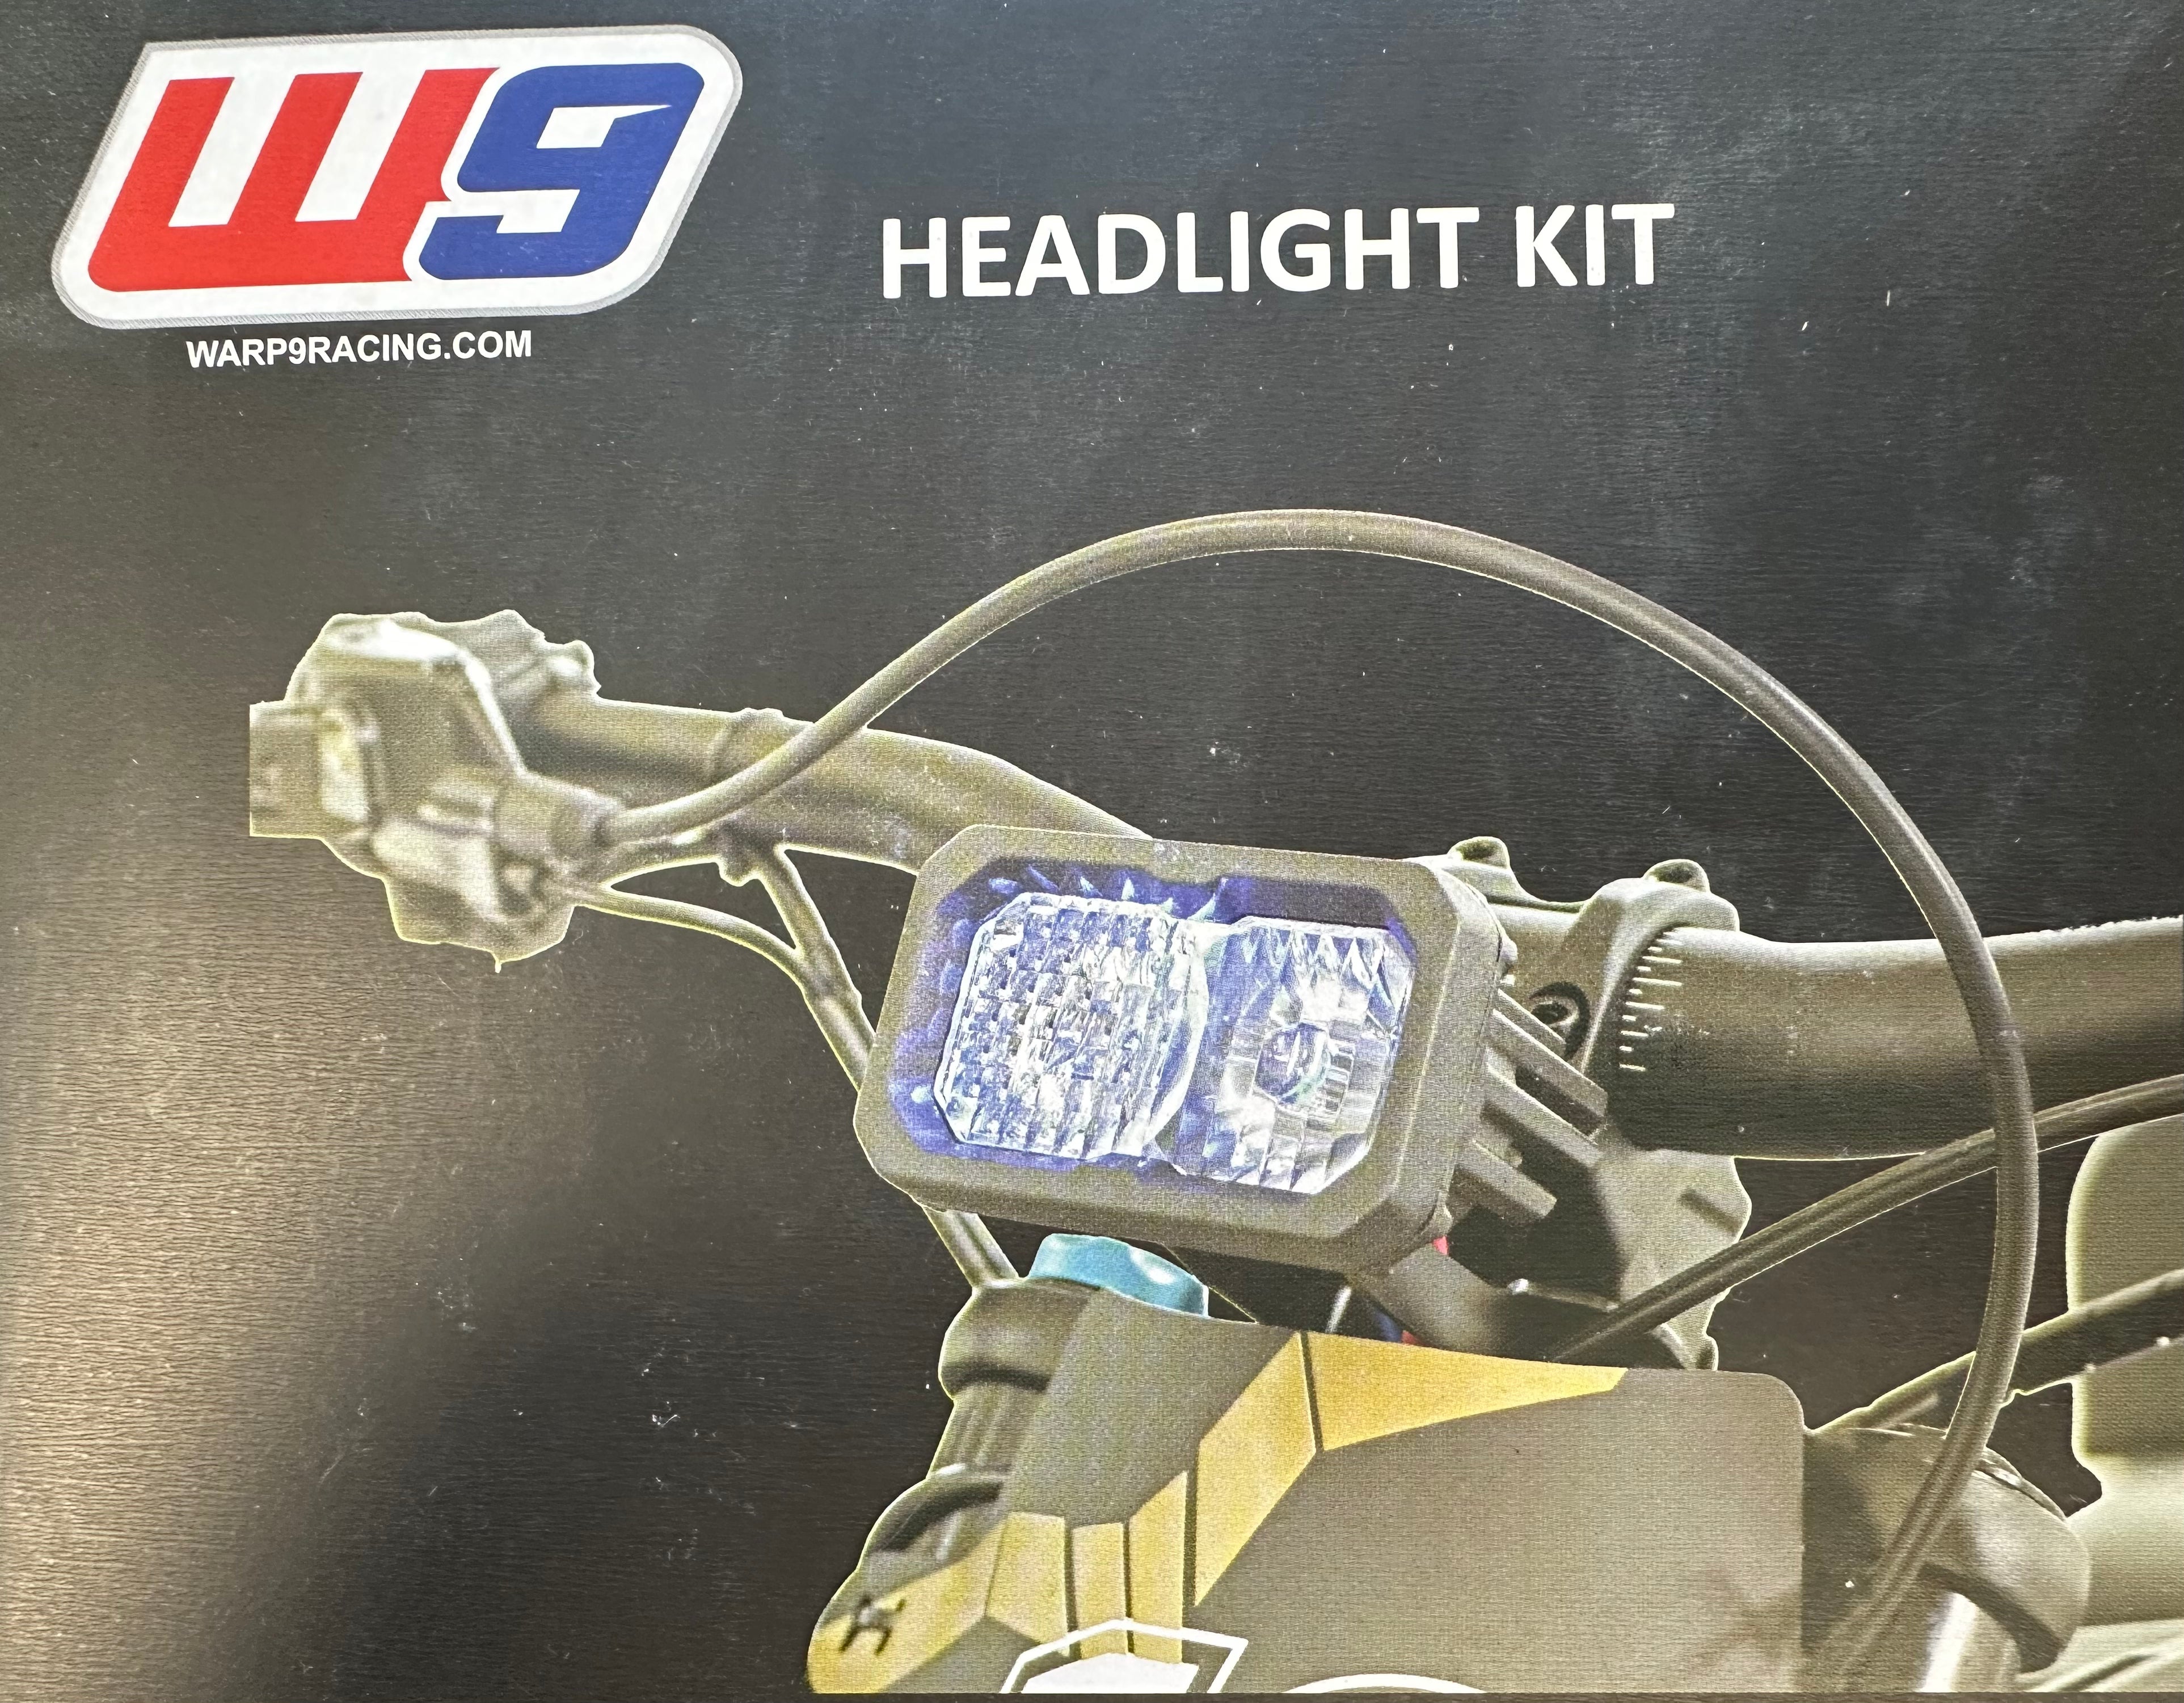 Headlight for Surron Light Bee / Talaria Sting by Warp 9